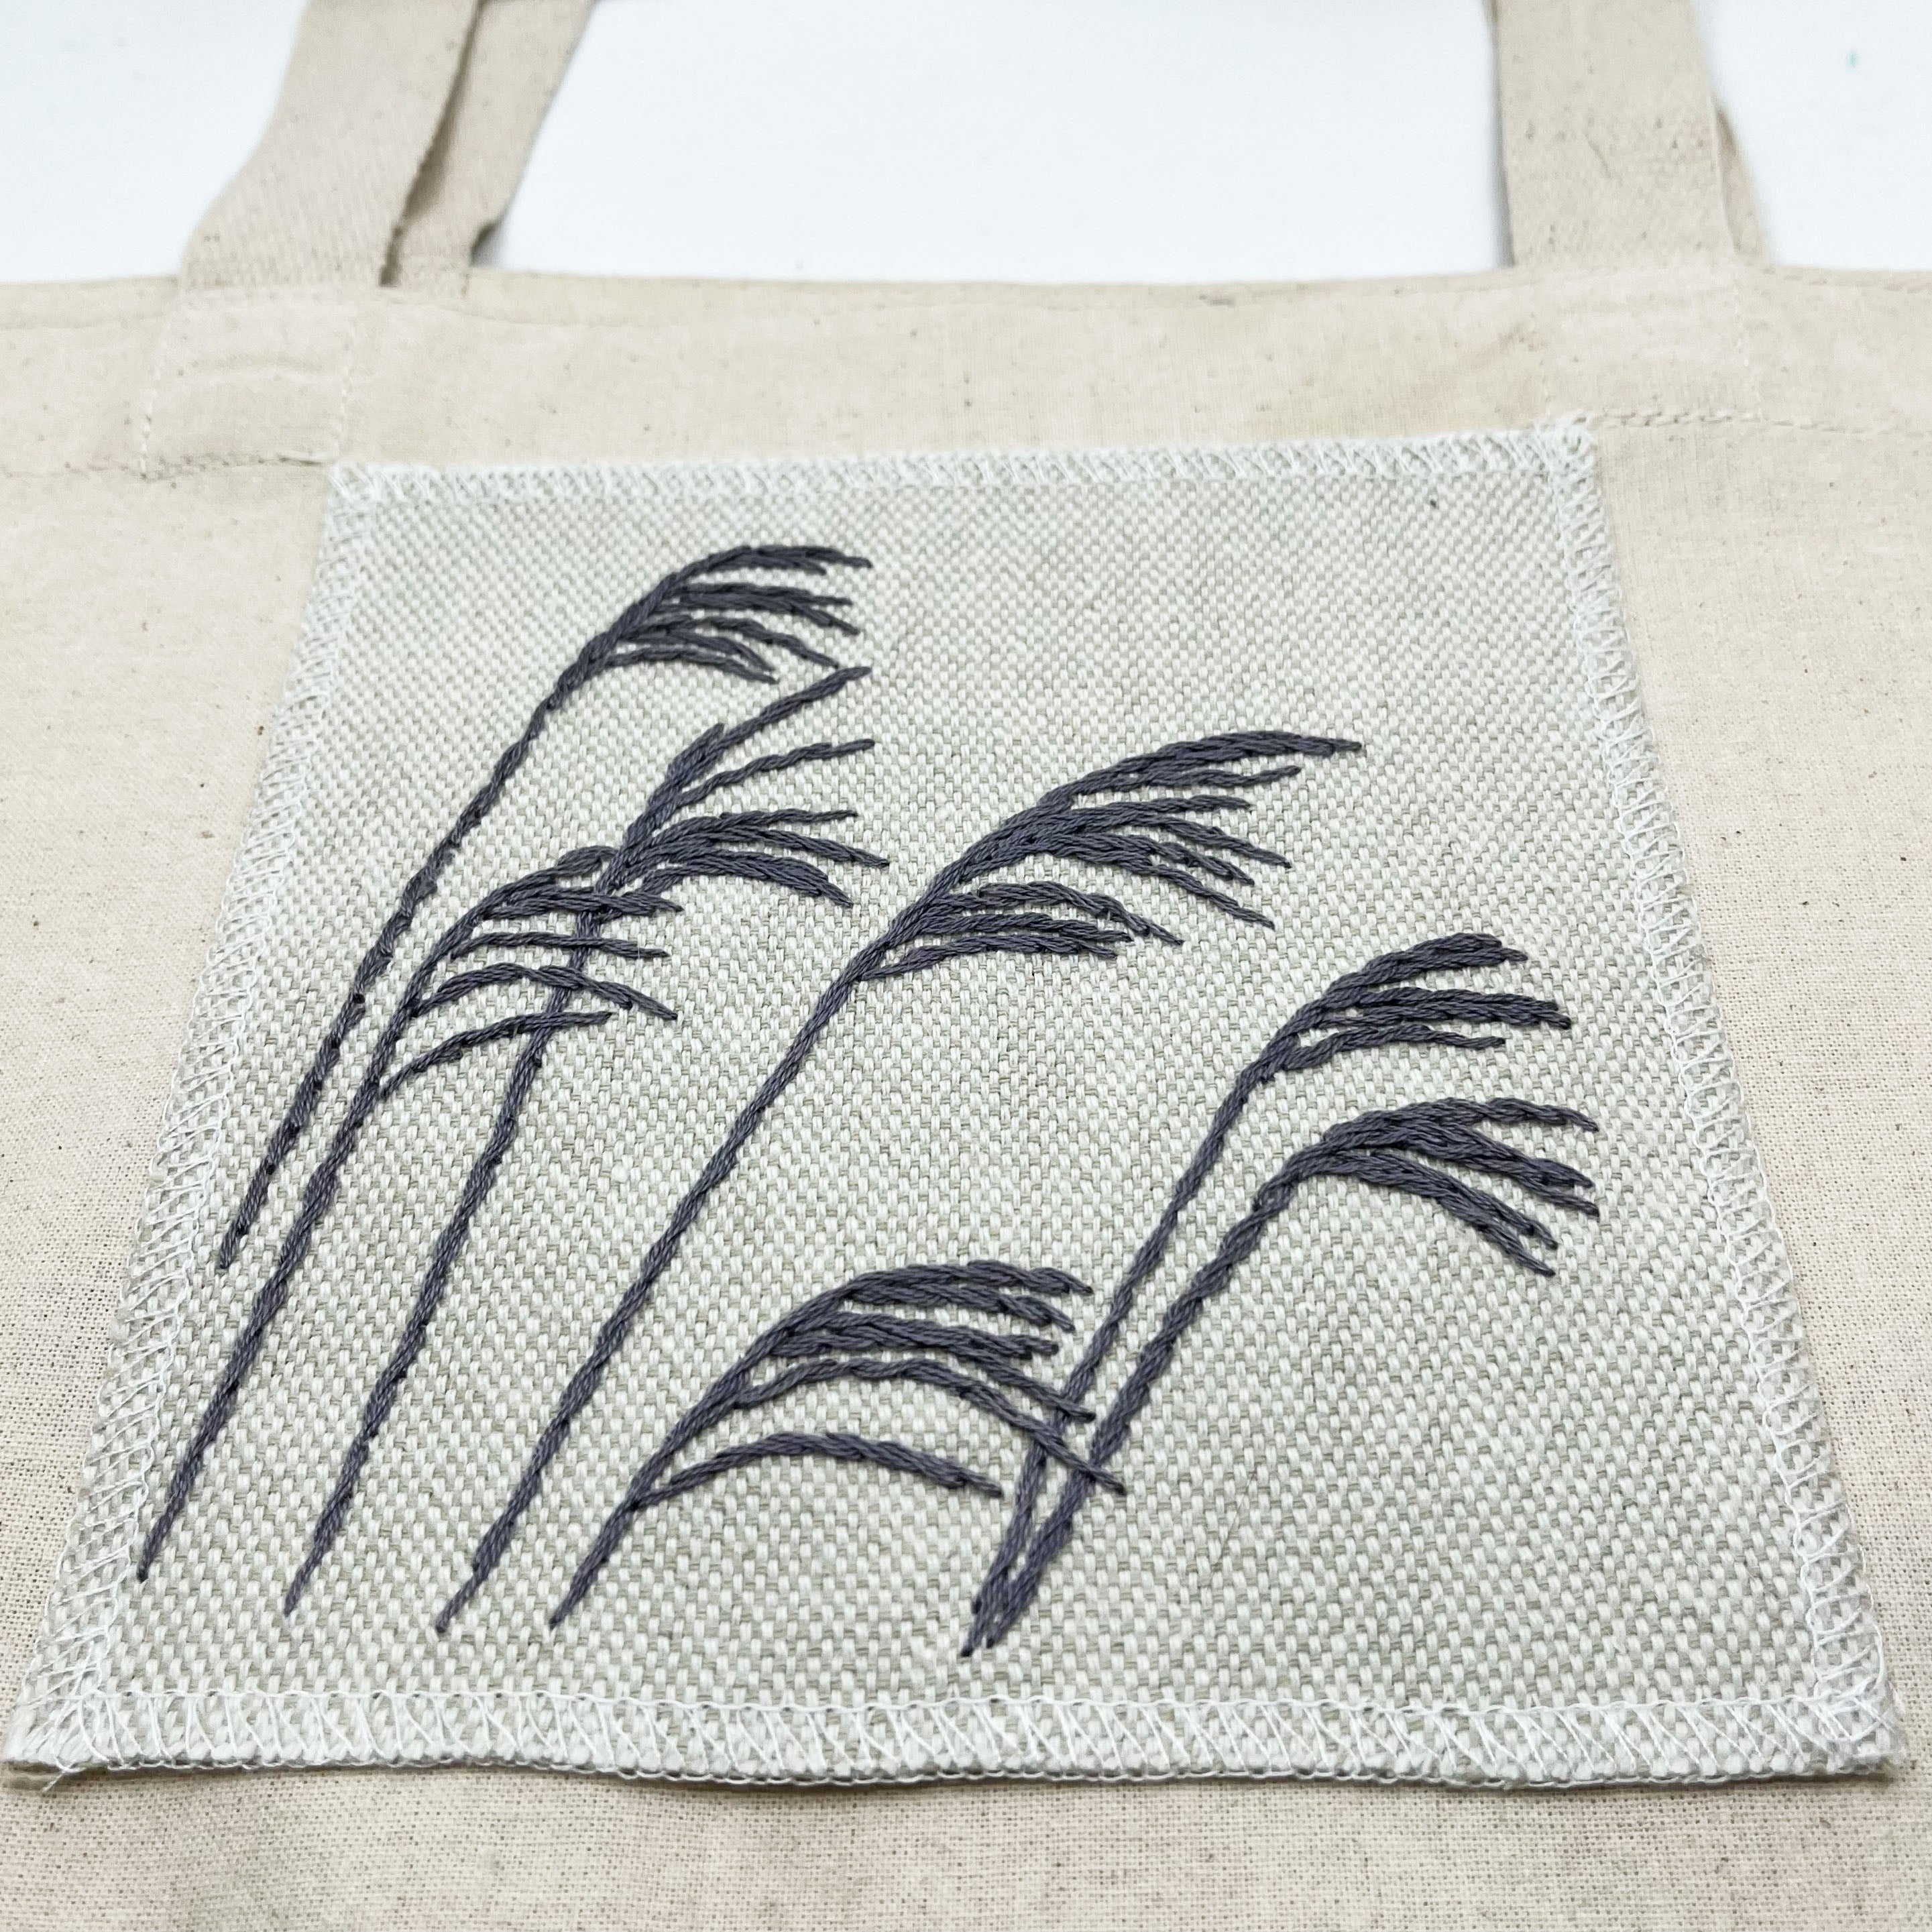 Hand Embroidered Wild Grass Patch